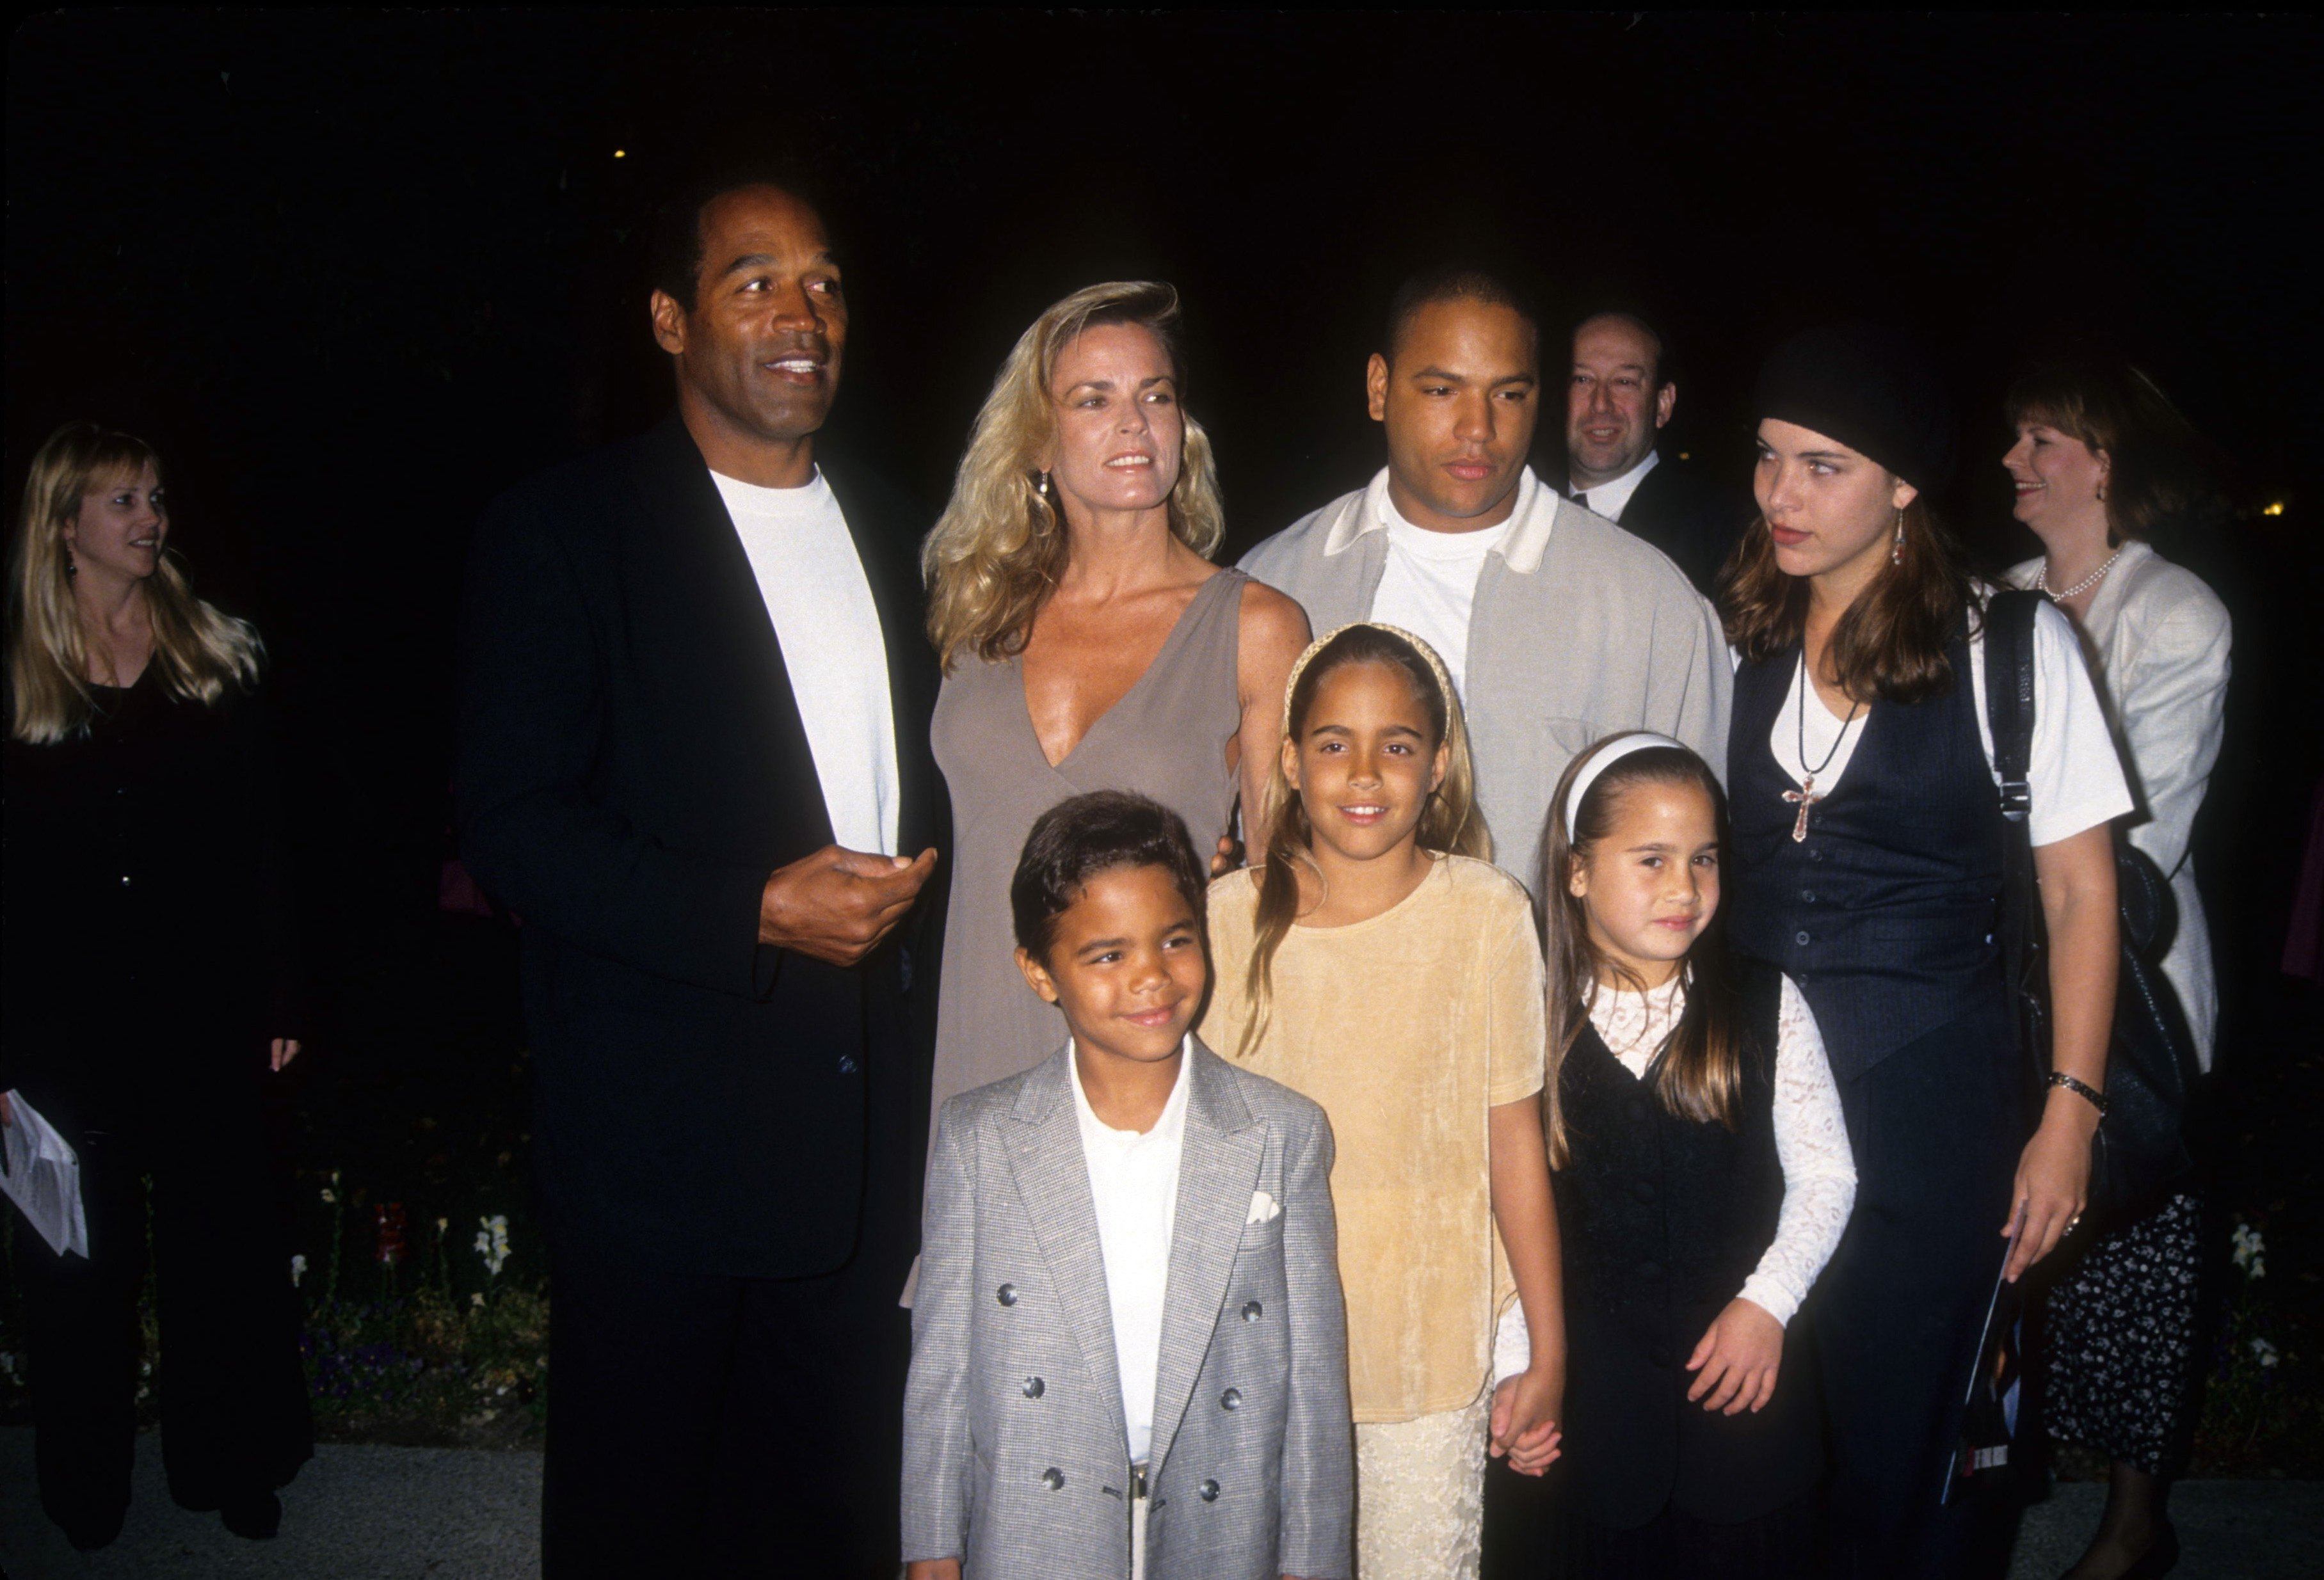 OJ Simpson, Nicole Brown Simpson, Jason Simpson, Sydney Brooke Simpson and Justin Ryan Simpson pose at the premiere of the Naked Gun 33 1/3: The Final Insult in which OJ starred in 1994, in Los Angeles, California. Photo: Getty Images